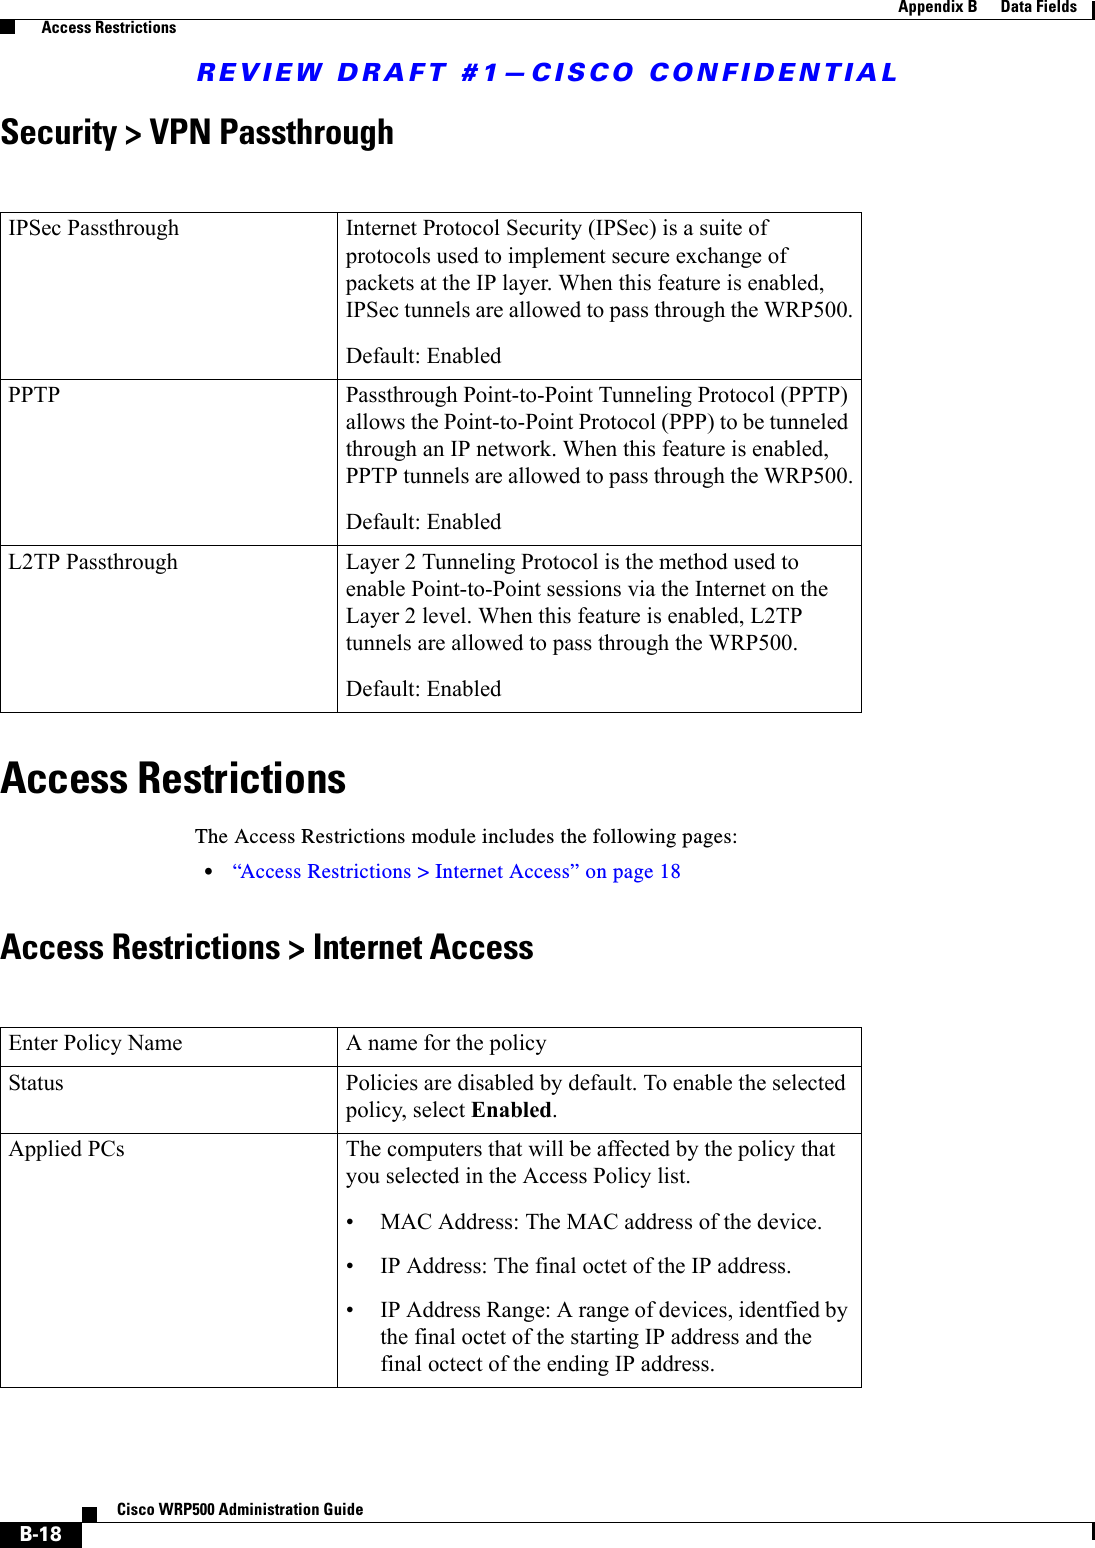 REVIEW DRAFT #1—CISCO CONFIDENTIALB-18Cisco WRP500 Administration Guide Appendix B      Data Fields  Access RestrictionsSecurity &gt; VPN PassthroughAccess RestrictionsThe Access Restrictions module includes the following pages: •“Access Restrictions &gt; Internet Access” on page 18Access Restrictions &gt; Internet Access  IPSec Passthrough Internet Protocol Security (IPSec) is a suite of protocols used to implement secure exchange of packets at the IP layer. When this feature is enabled, IPSec tunnels are allowed to pass through the WRP500.Default: EnabledPPTP Passthrough Point-to-Point Tunneling Protocol (PPTP) allows the Point-to-Point Protocol (PPP) to be tunneled through an IP network. When this feature is enabled, PPTP tunnels are allowed to pass through the WRP500.Default: EnabledL2TP Passthrough Layer 2 Tunneling Protocol is the method used to enable Point-to-Point sessions via the Internet on the Layer 2 level. When this feature is enabled, L2TP tunnels are allowed to pass through the WRP500.Default: EnabledEnter Policy Name A name for the policyStatus Policies are disabled by default. To enable the selected policy, select Enabled.Applied PCs The computers that will be affected by the policy that you selected in the Access Policy list.• MAC Address: The MAC address of the device.• IP Address: The final octet of the IP address.• IP Address Range: A range of devices, identfied by the final octet of the starting IP address and the final octect of the ending IP address.